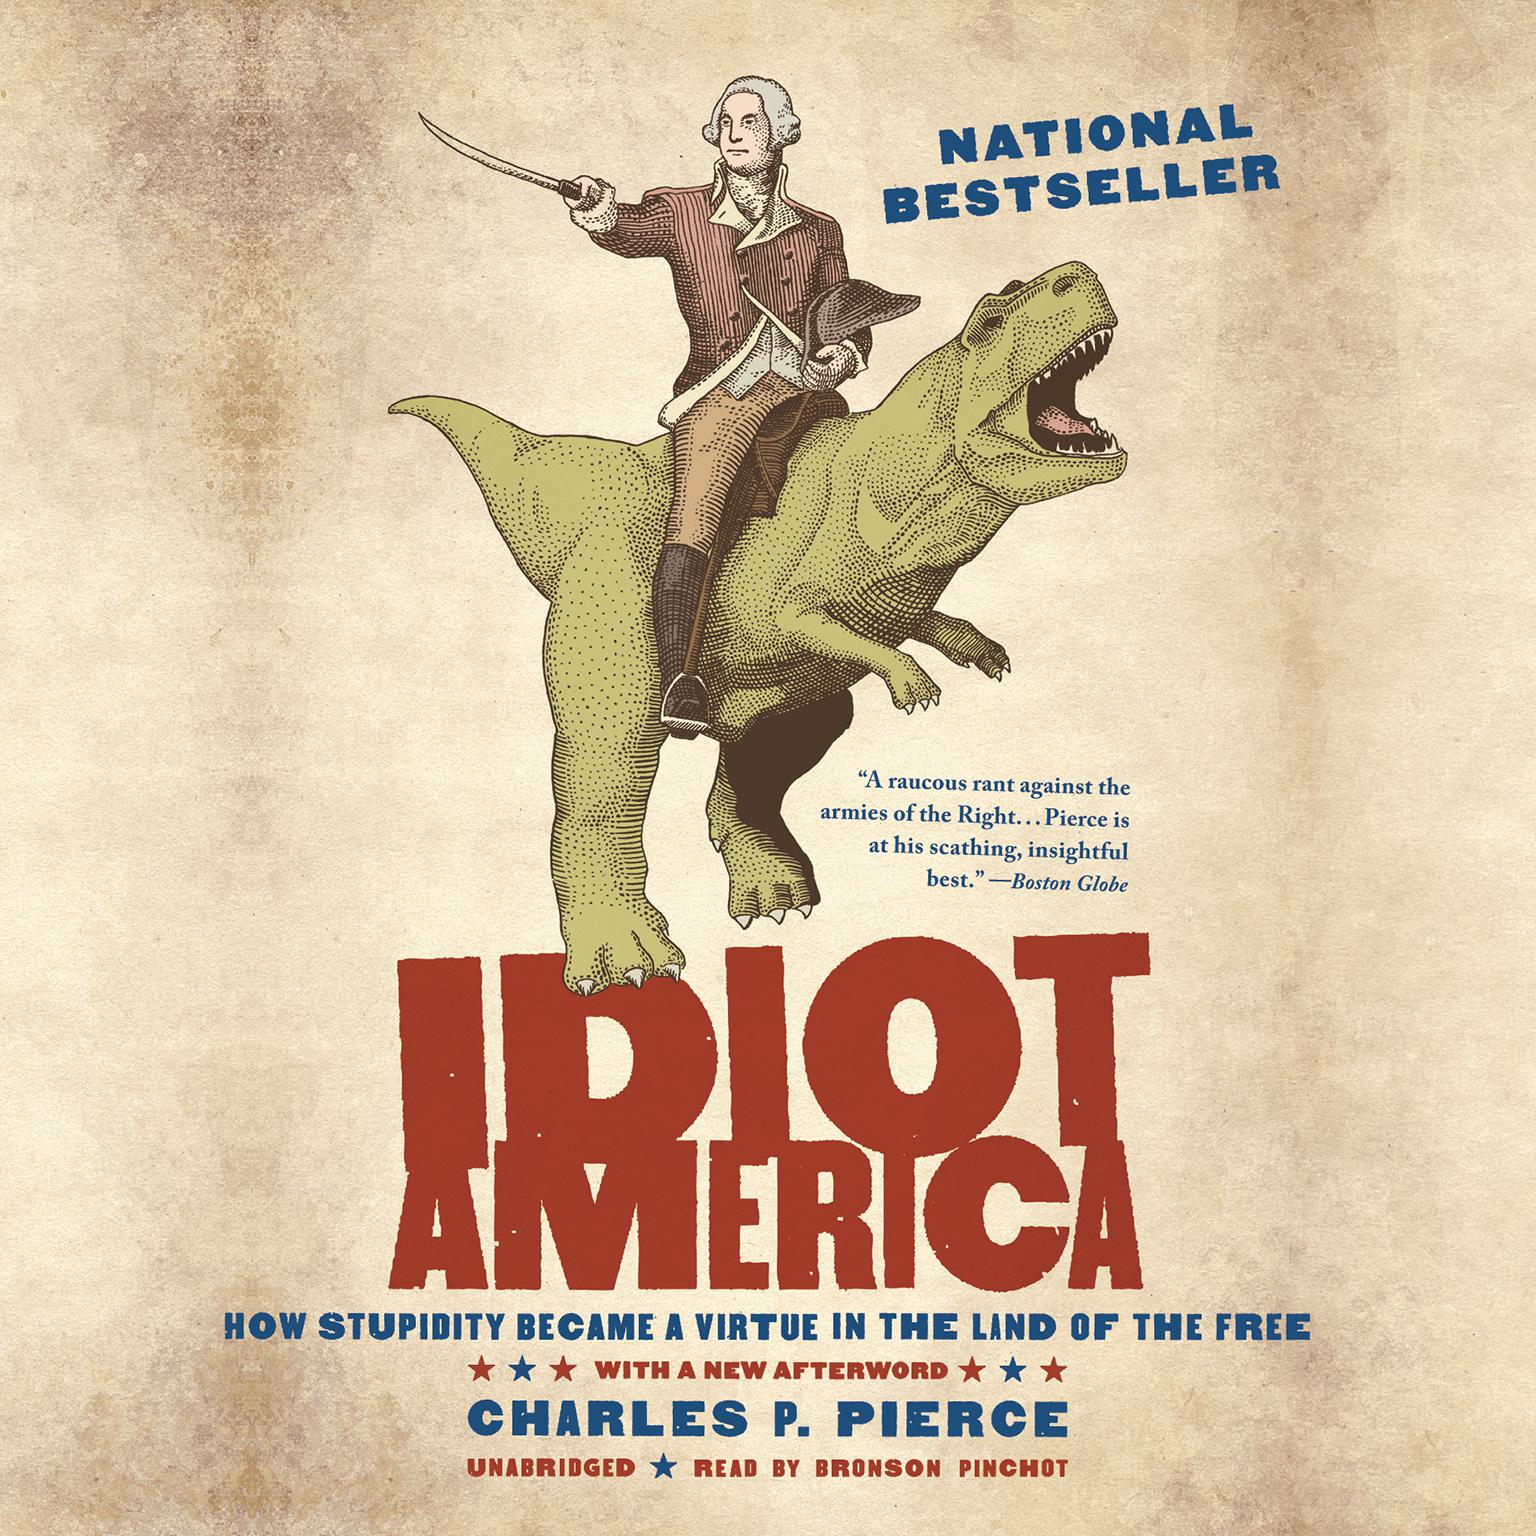 Idiot America: How Stupidity Became a Virtue in the Land of the Free Audiobook, by Charles P. Pierce